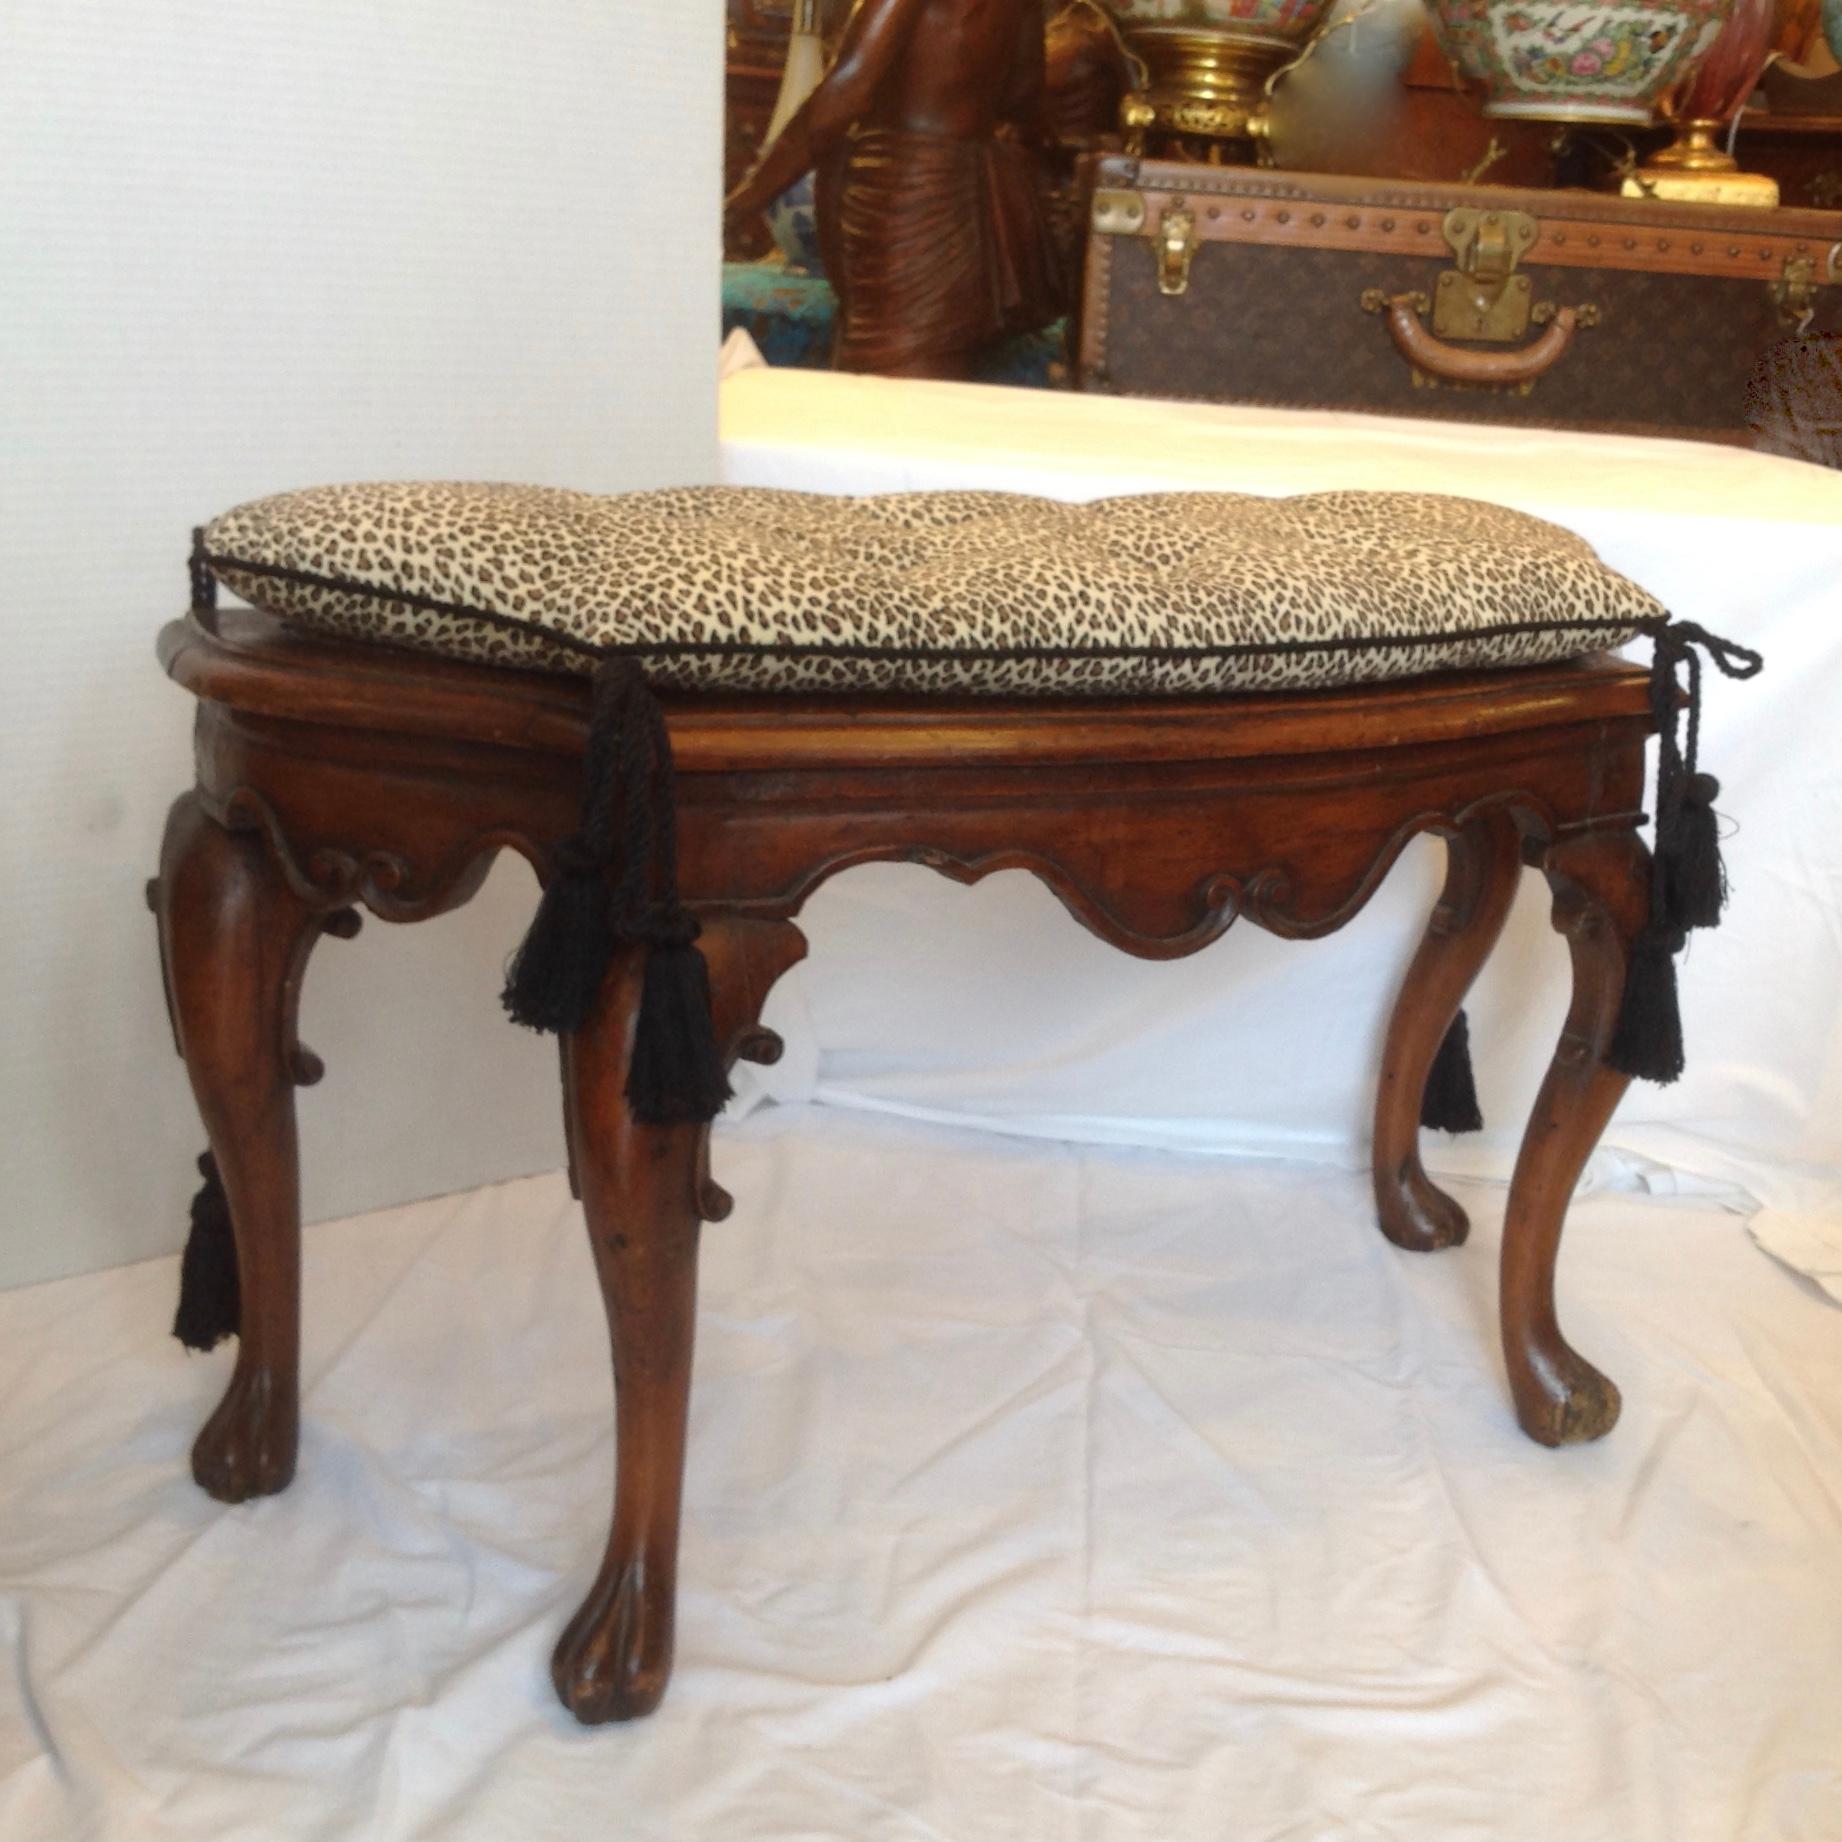 Beautifully carved in walnut and topped with a loose faux leopard cushion above the caned seat - superb style, scale and quality.